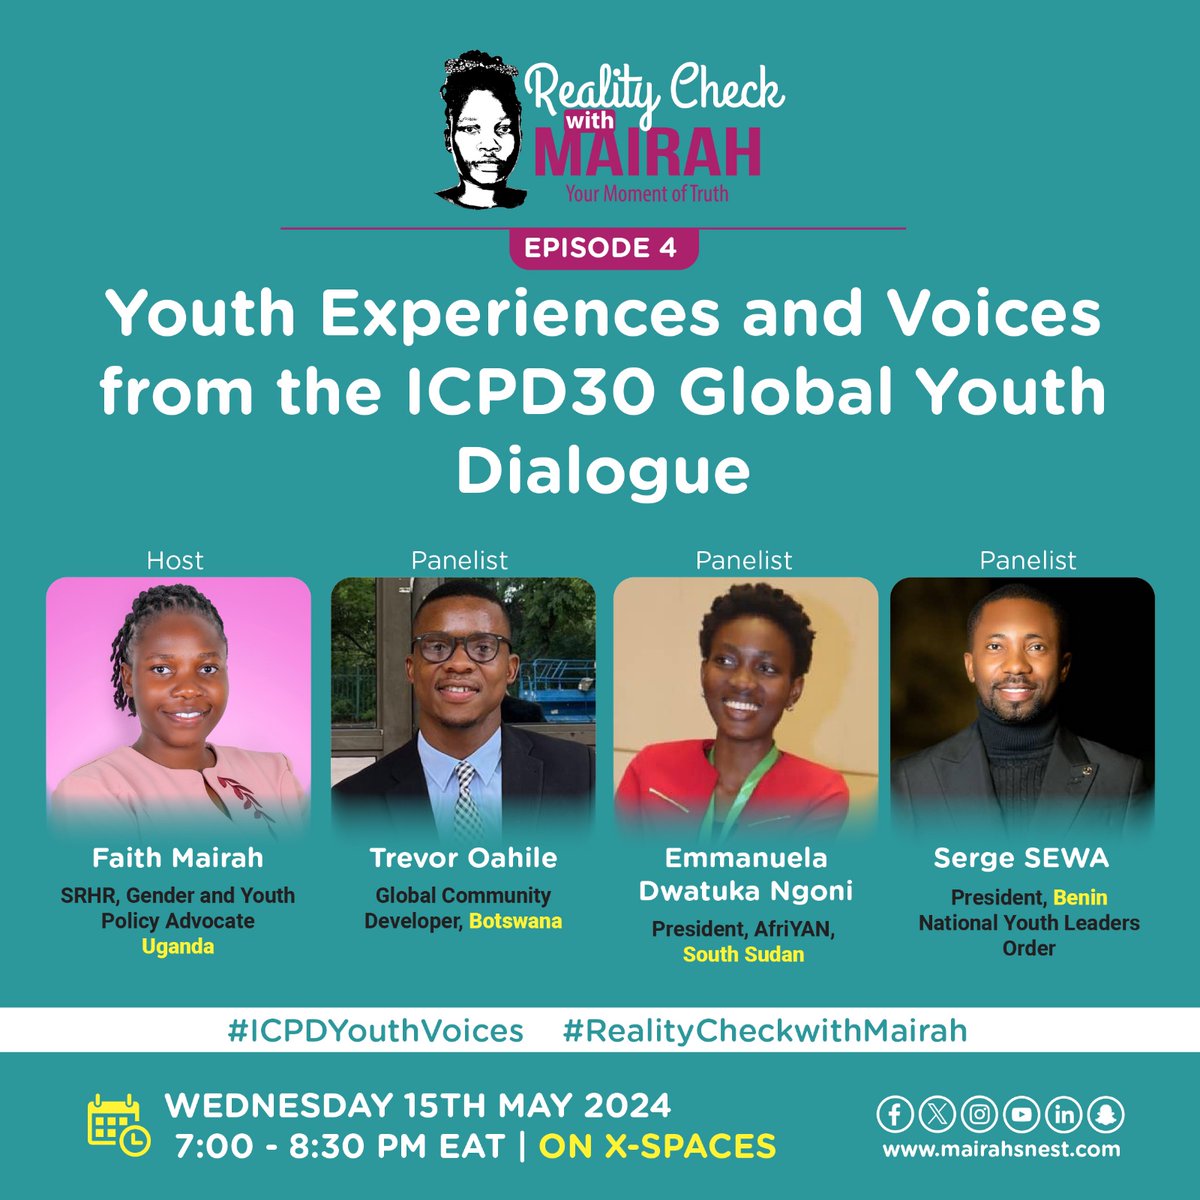 Missed out on the incredible #ICPD30 Global Youth Dialogue in Cotonou, Benin? Join the 4th episode of the Reality Check with Mairah for firsthand experiences, insights, and key takeaways from the #ICPD30 Global Youth Dialogue. x.com/i/spaces/1myxn… #icpdyouthvoices #SRHR